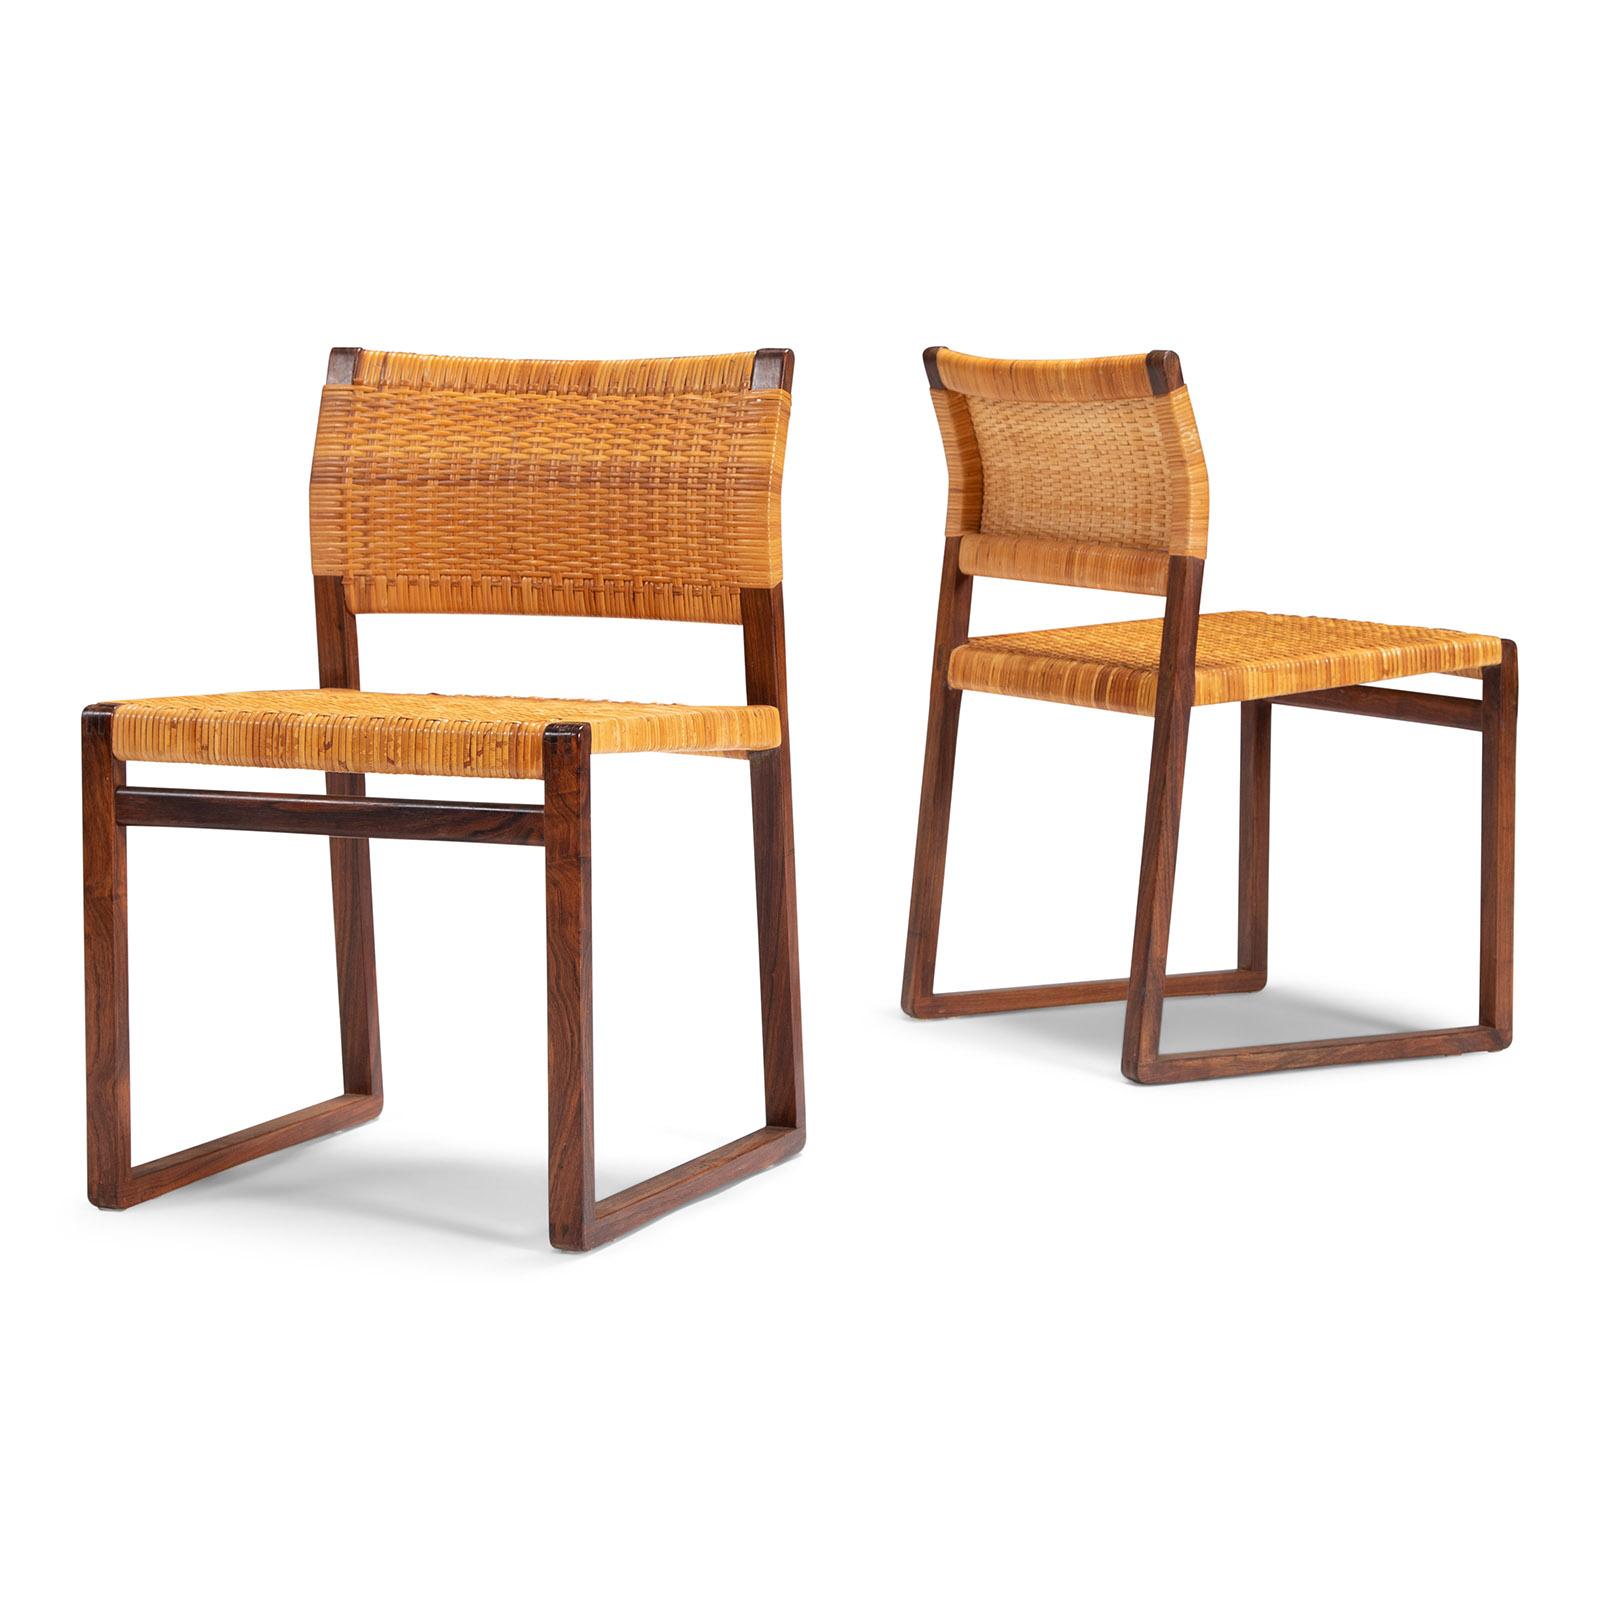 A set of elegant dining chairs with frames of solid rosewood and original cane seat and back. Designed by Børge Mogensen in 1957, made by P. Lauritzen, Denmark.